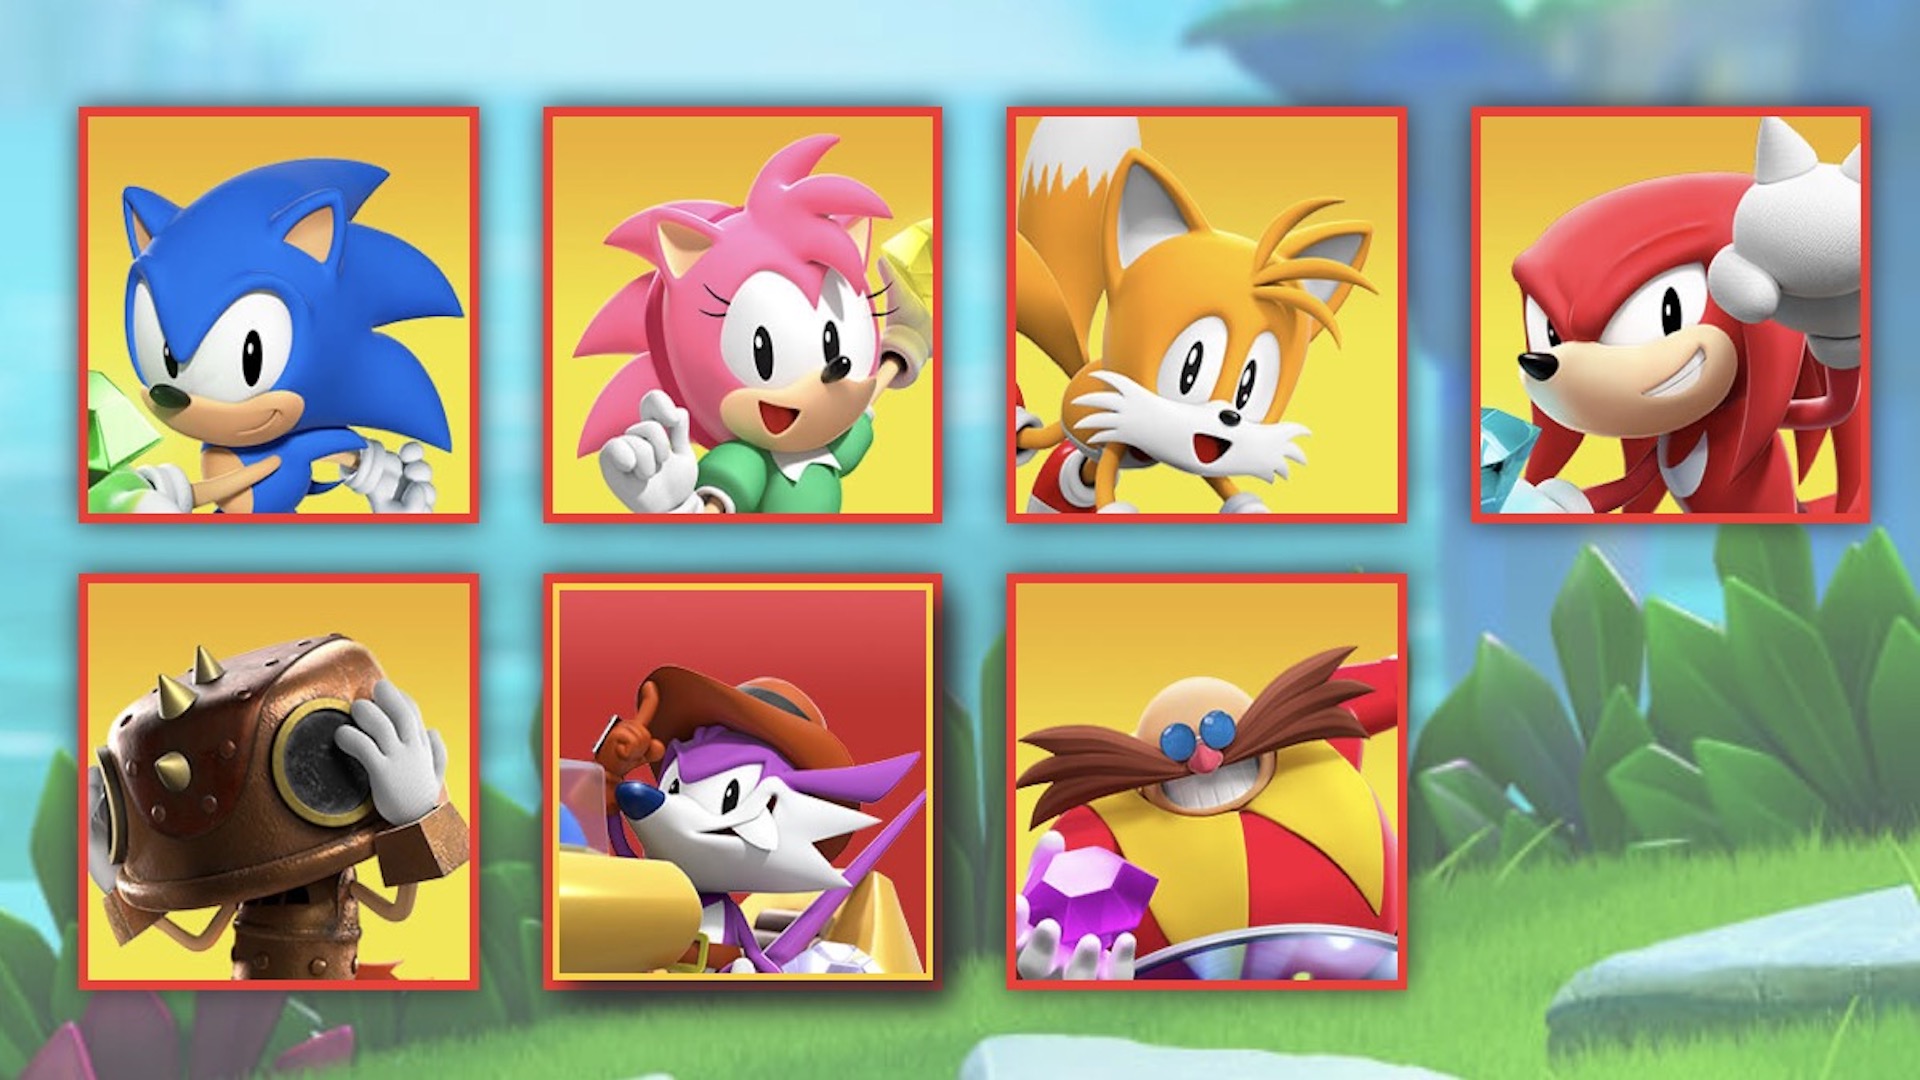 The character screen for Sonic Superstars, showing Sonic, Tails, Knuckles, Amy, Trip, Fang and Eggman